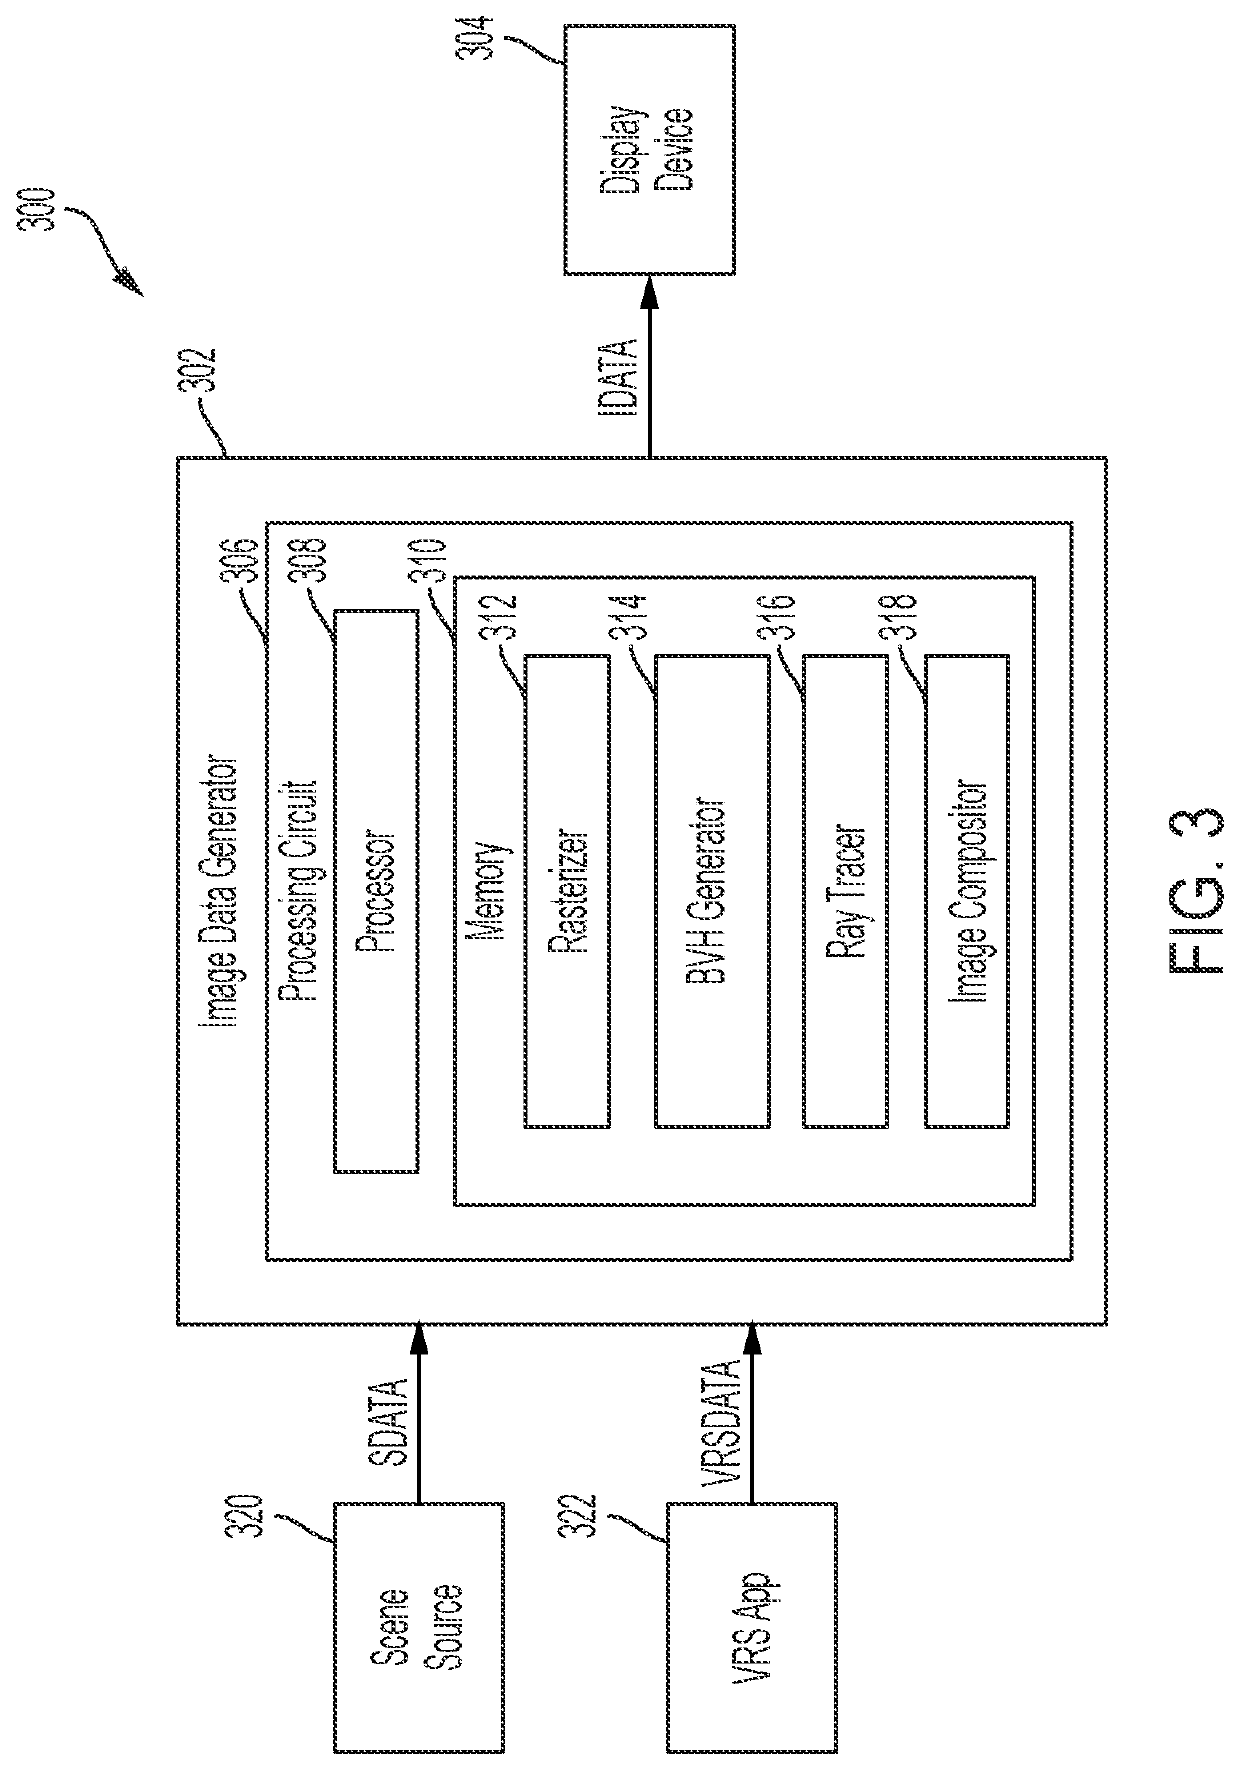 Systems and methods of adaptive, variable-rate, hybrid ray tracing